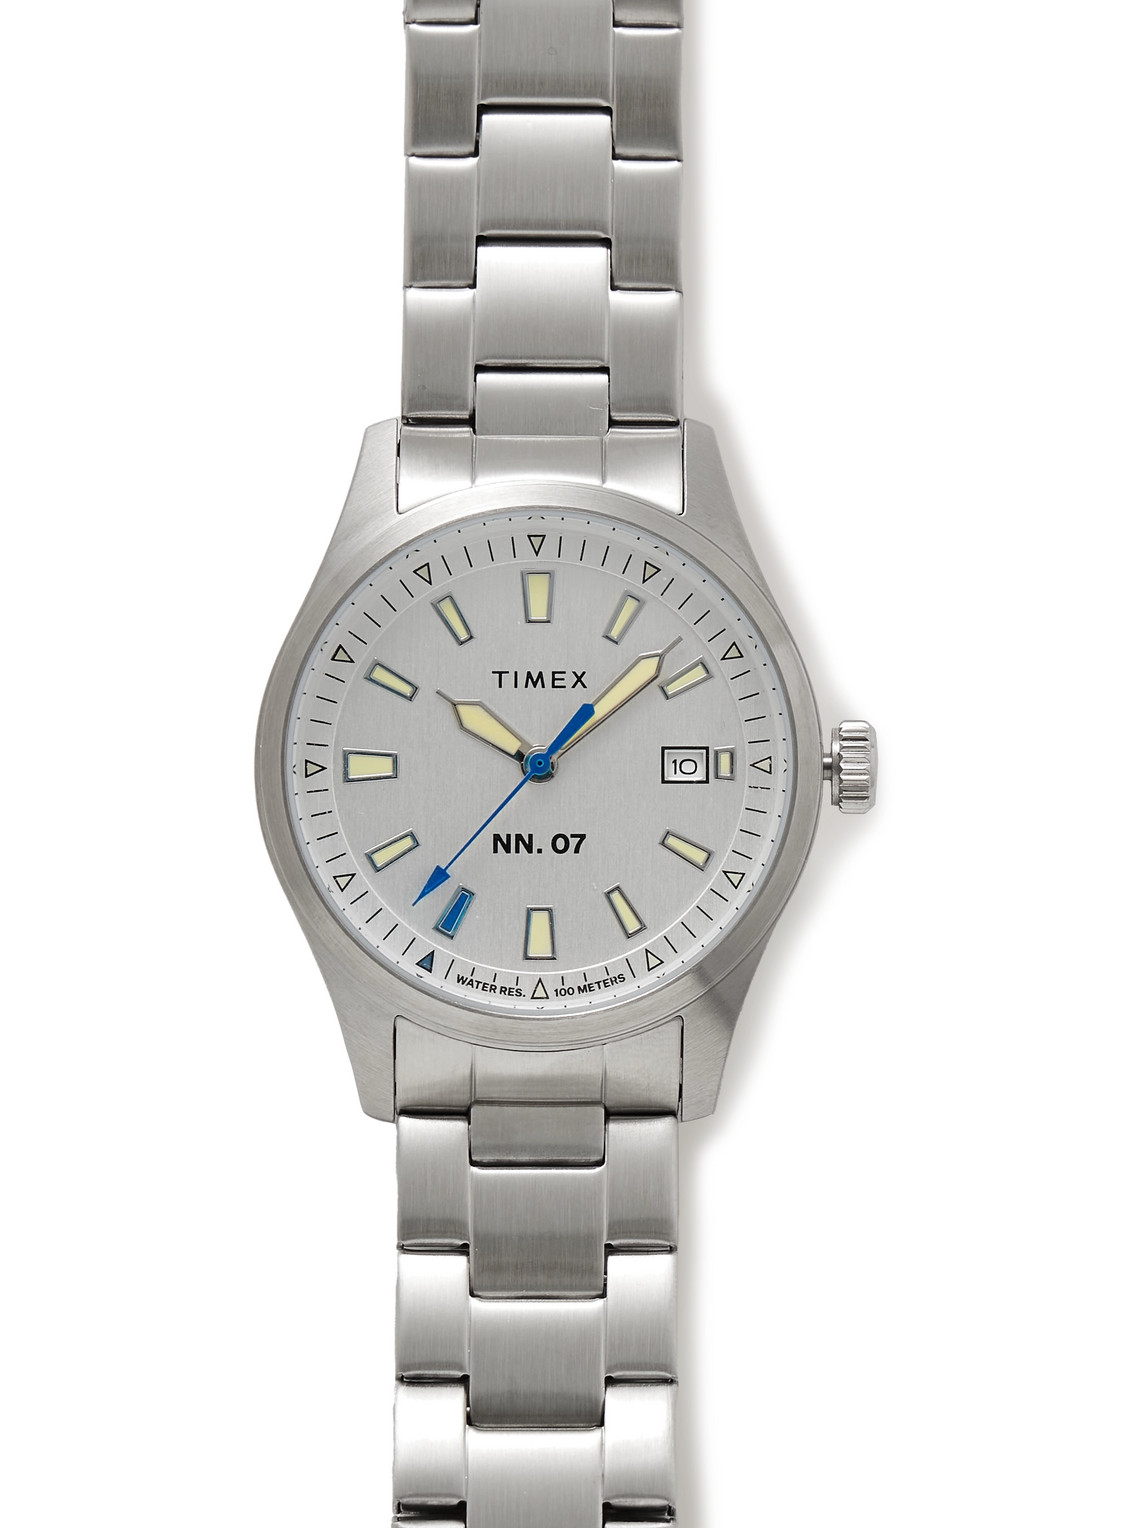 Timex Expedition North Field Post 36mm Stainless Steel Watch